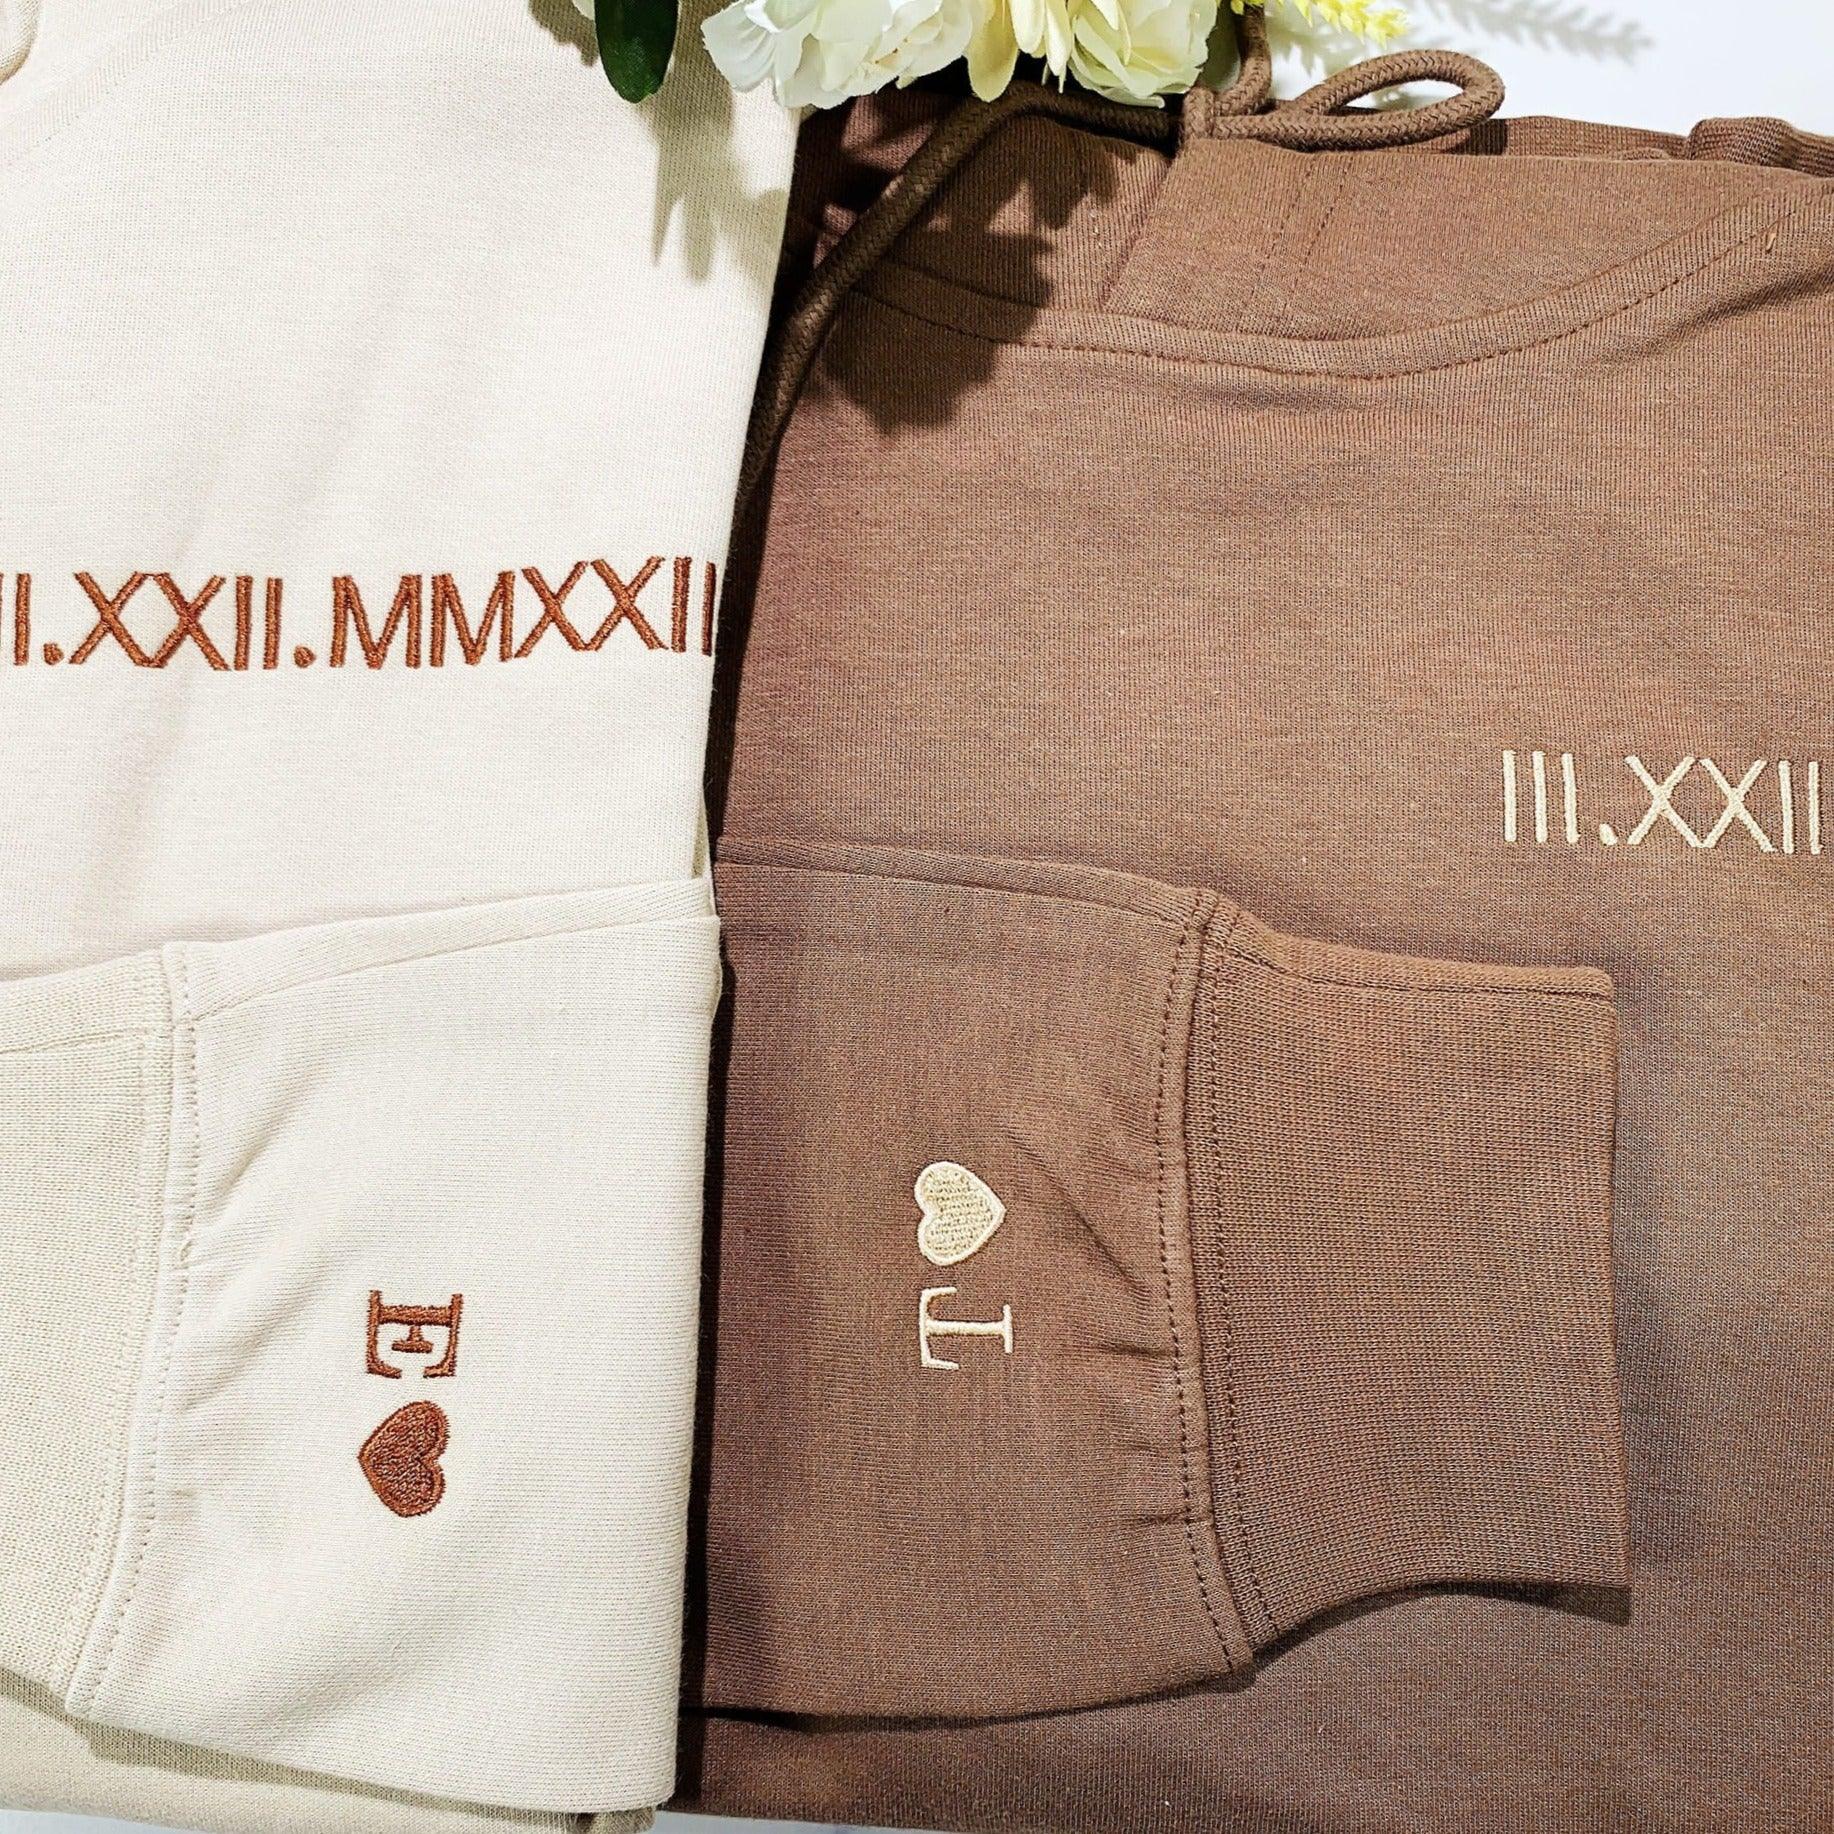 Custom Date Roman Numeral Embroidered Couples Gift Hoodie Sweatshirt